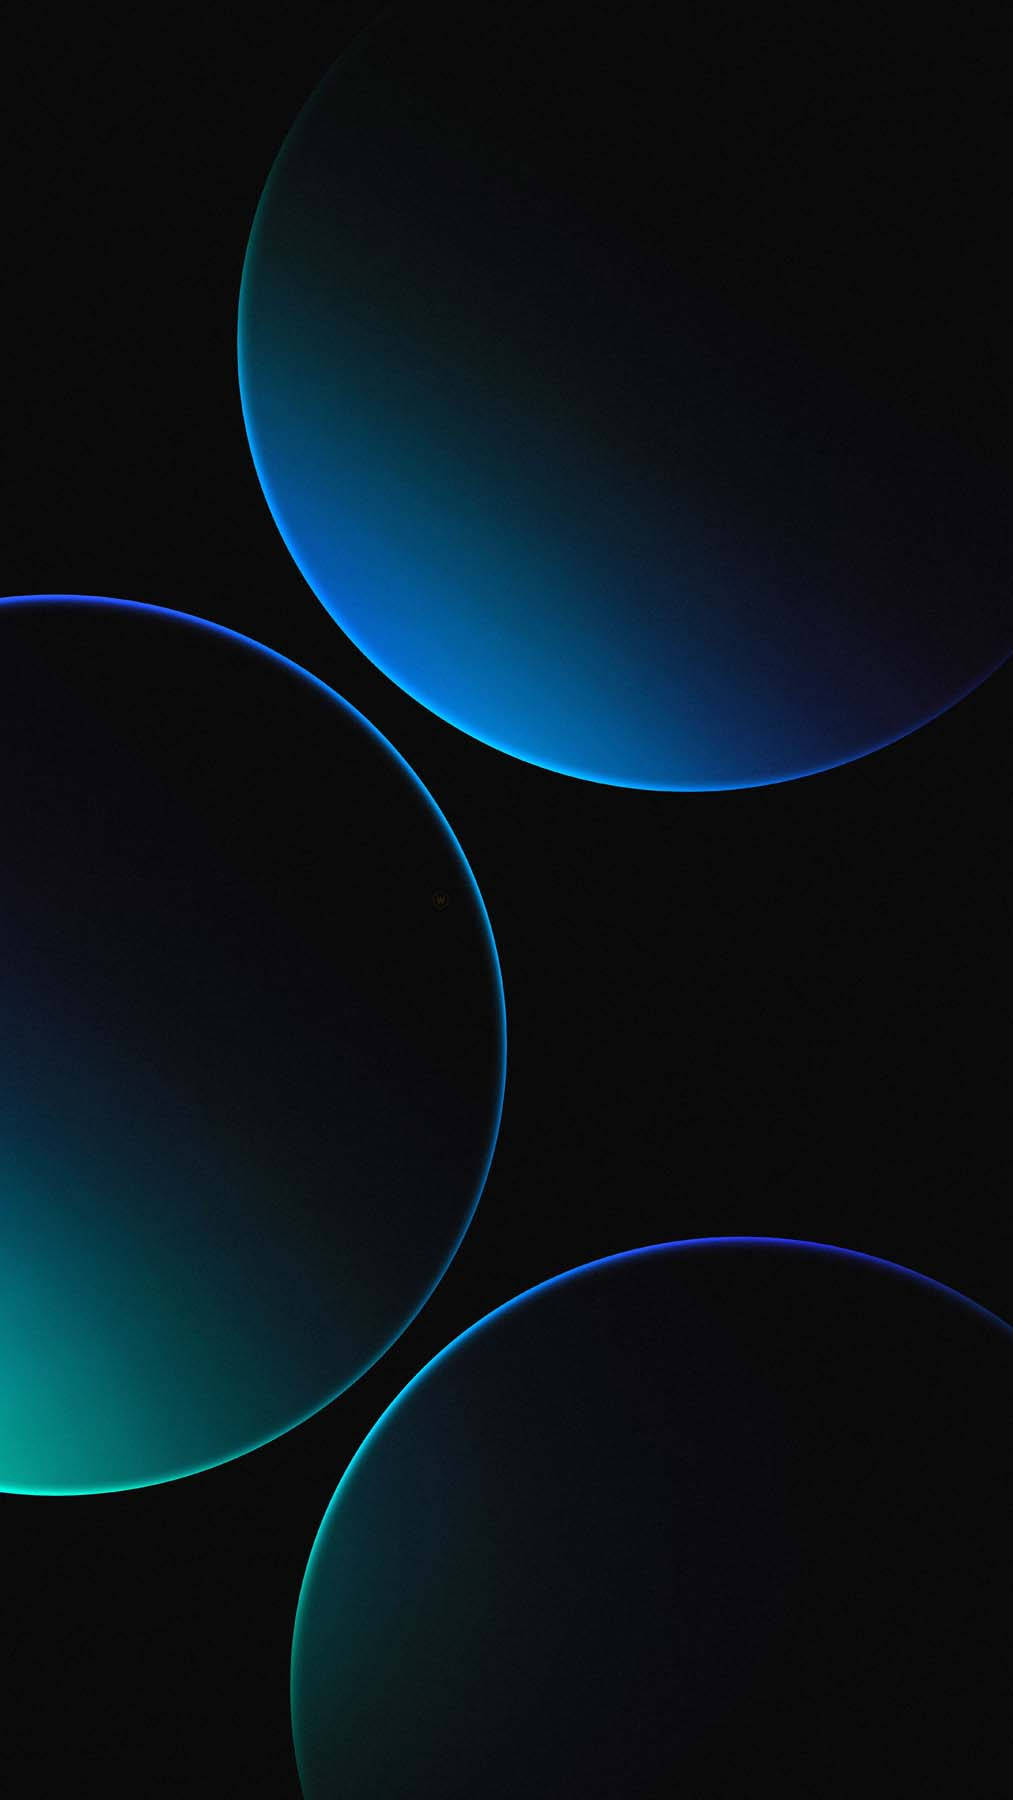 black and blue iphone wallpaper